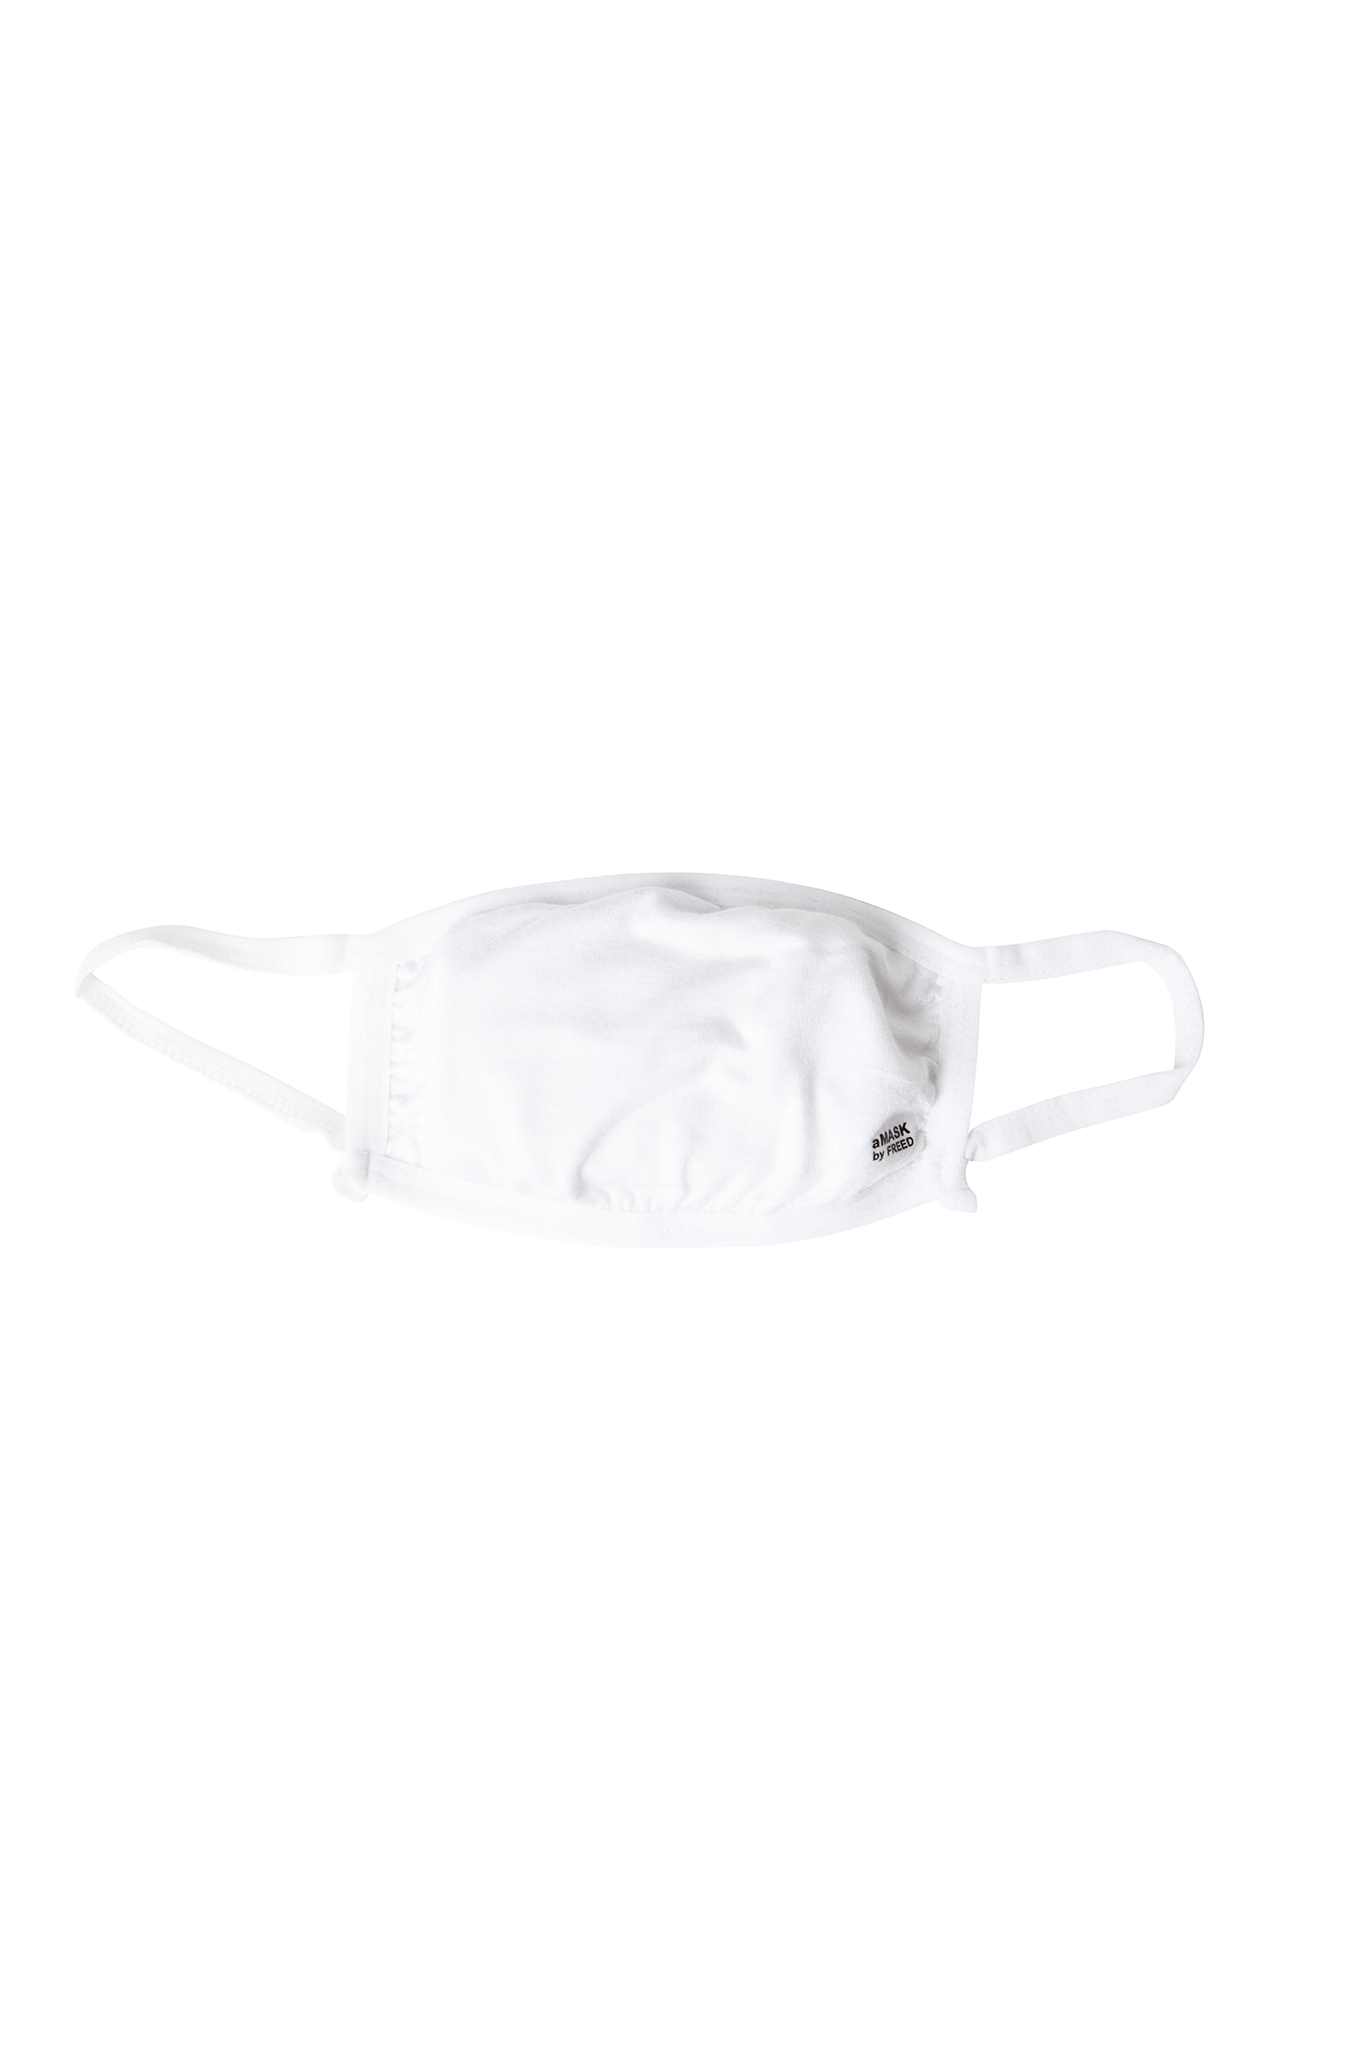 White Adult breathable face mask.